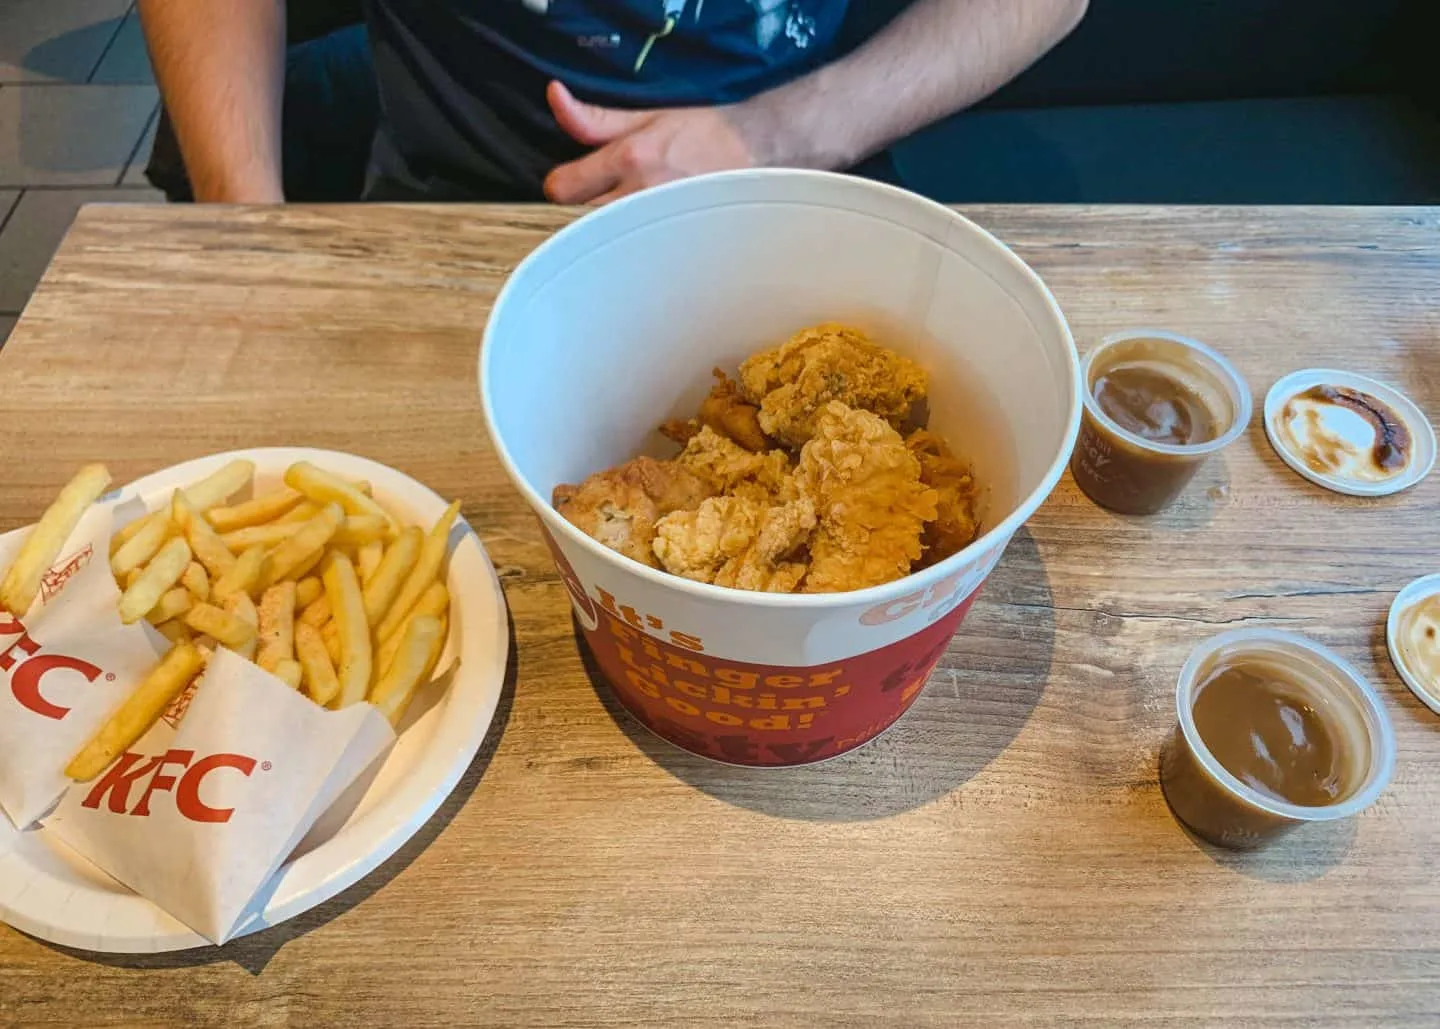 KFC in Iceland supposedly is the best in the world